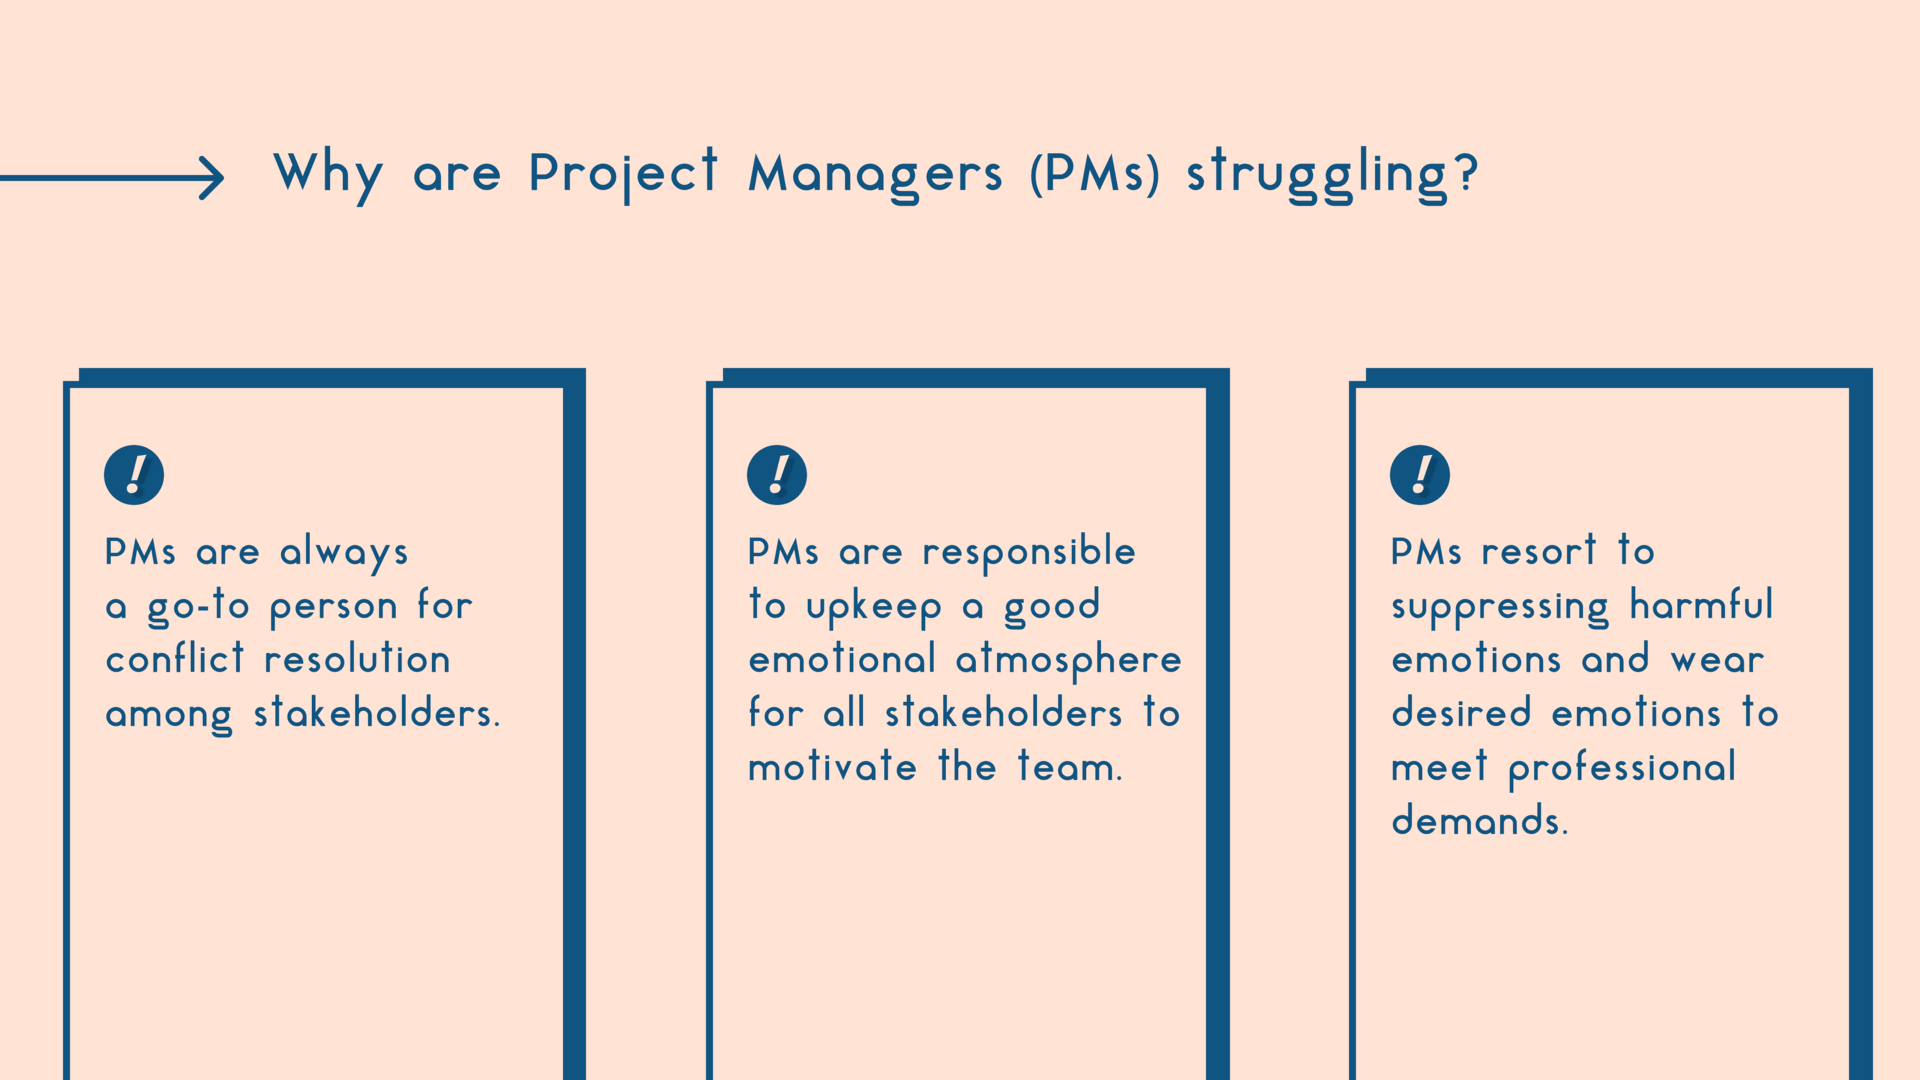 Why are project managers struggling?